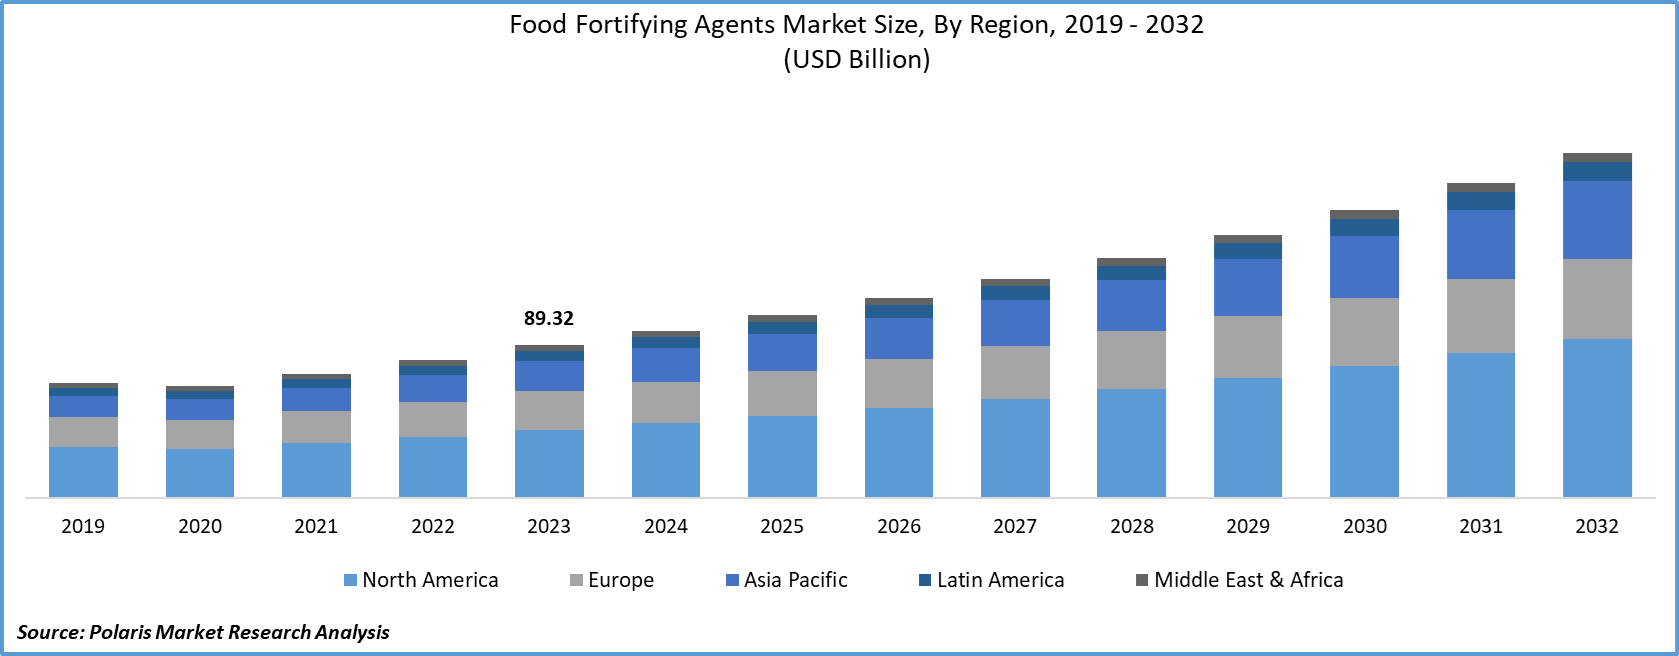 Food Fortifying Agents Market Size